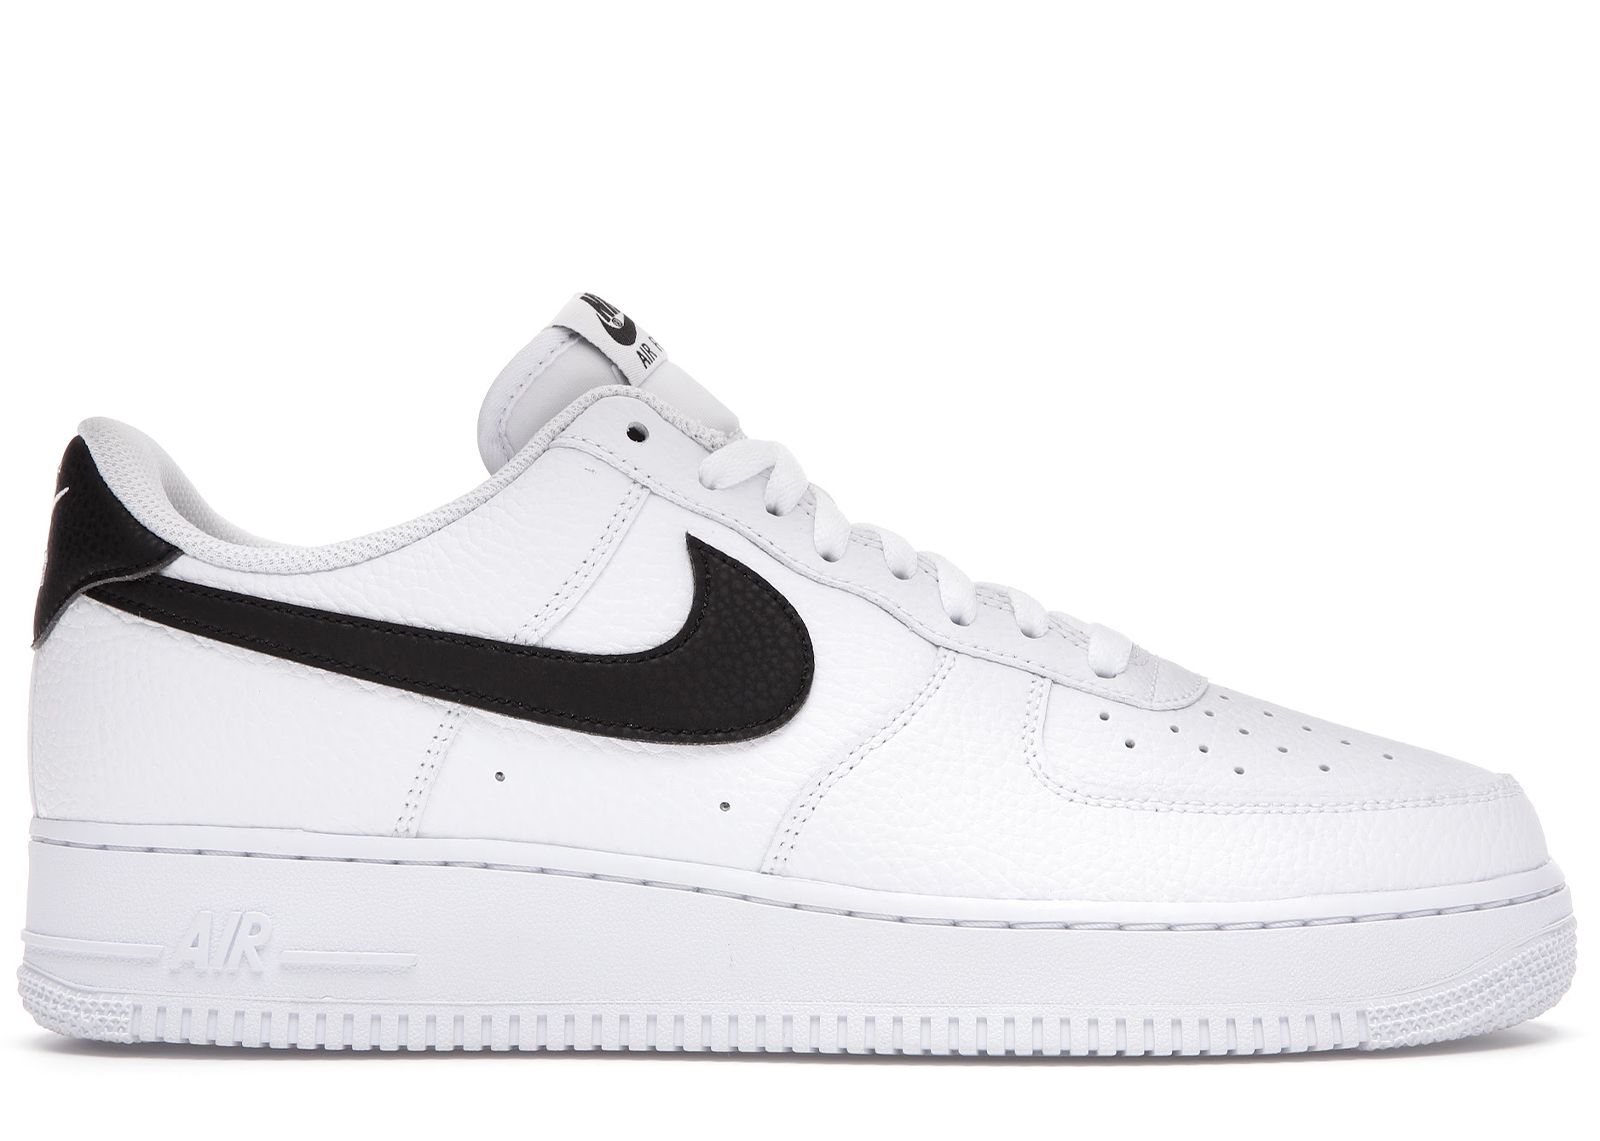 Nike Air Force 1 '07 White Black Pebbled Leather | StockX